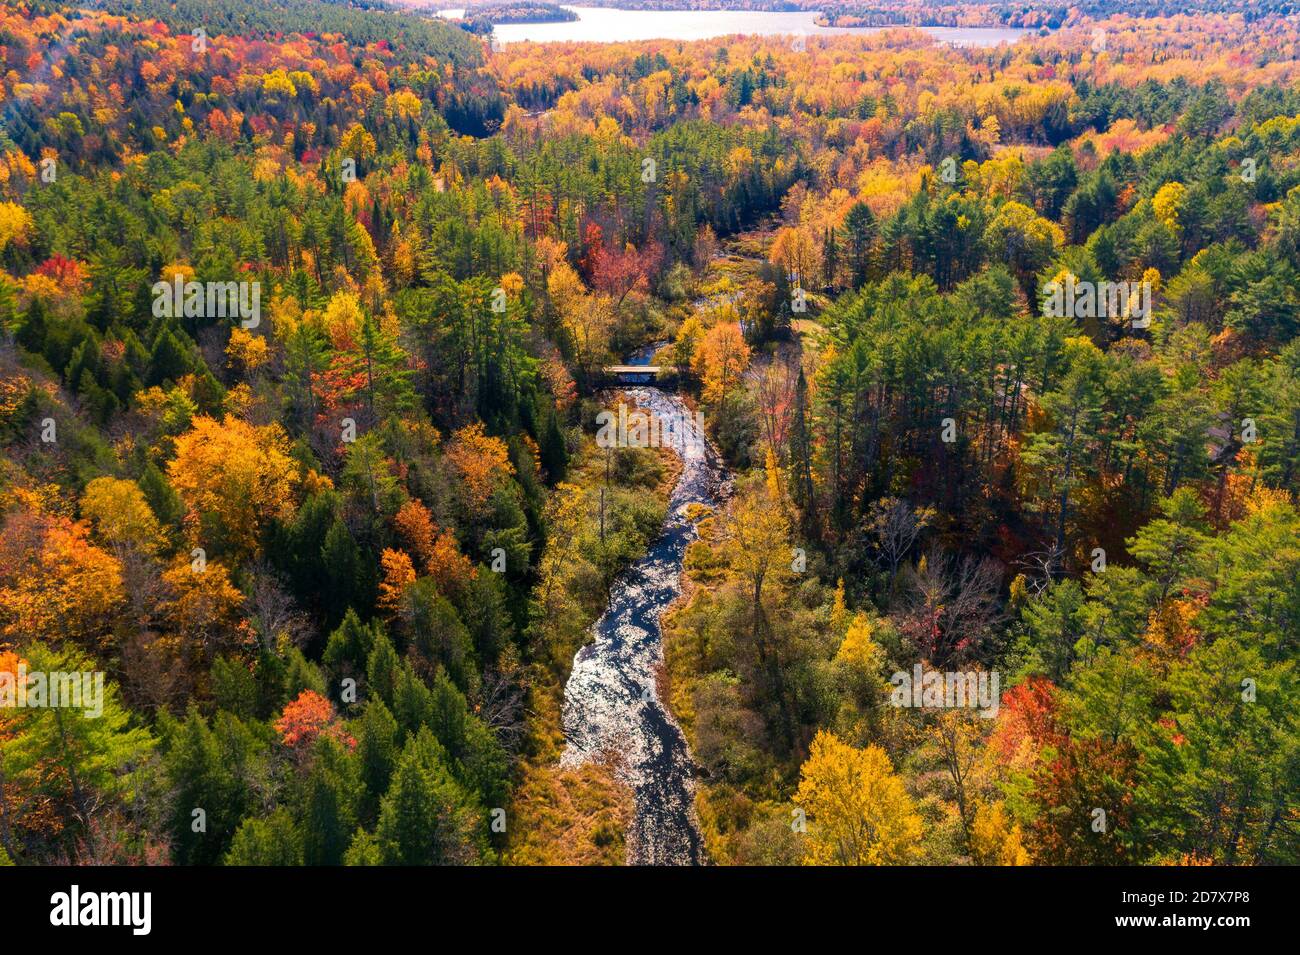 Aerial view of Winding River Through Autumn Trees with Fall Colors in Adirondacks, New York, New England Stock Photo